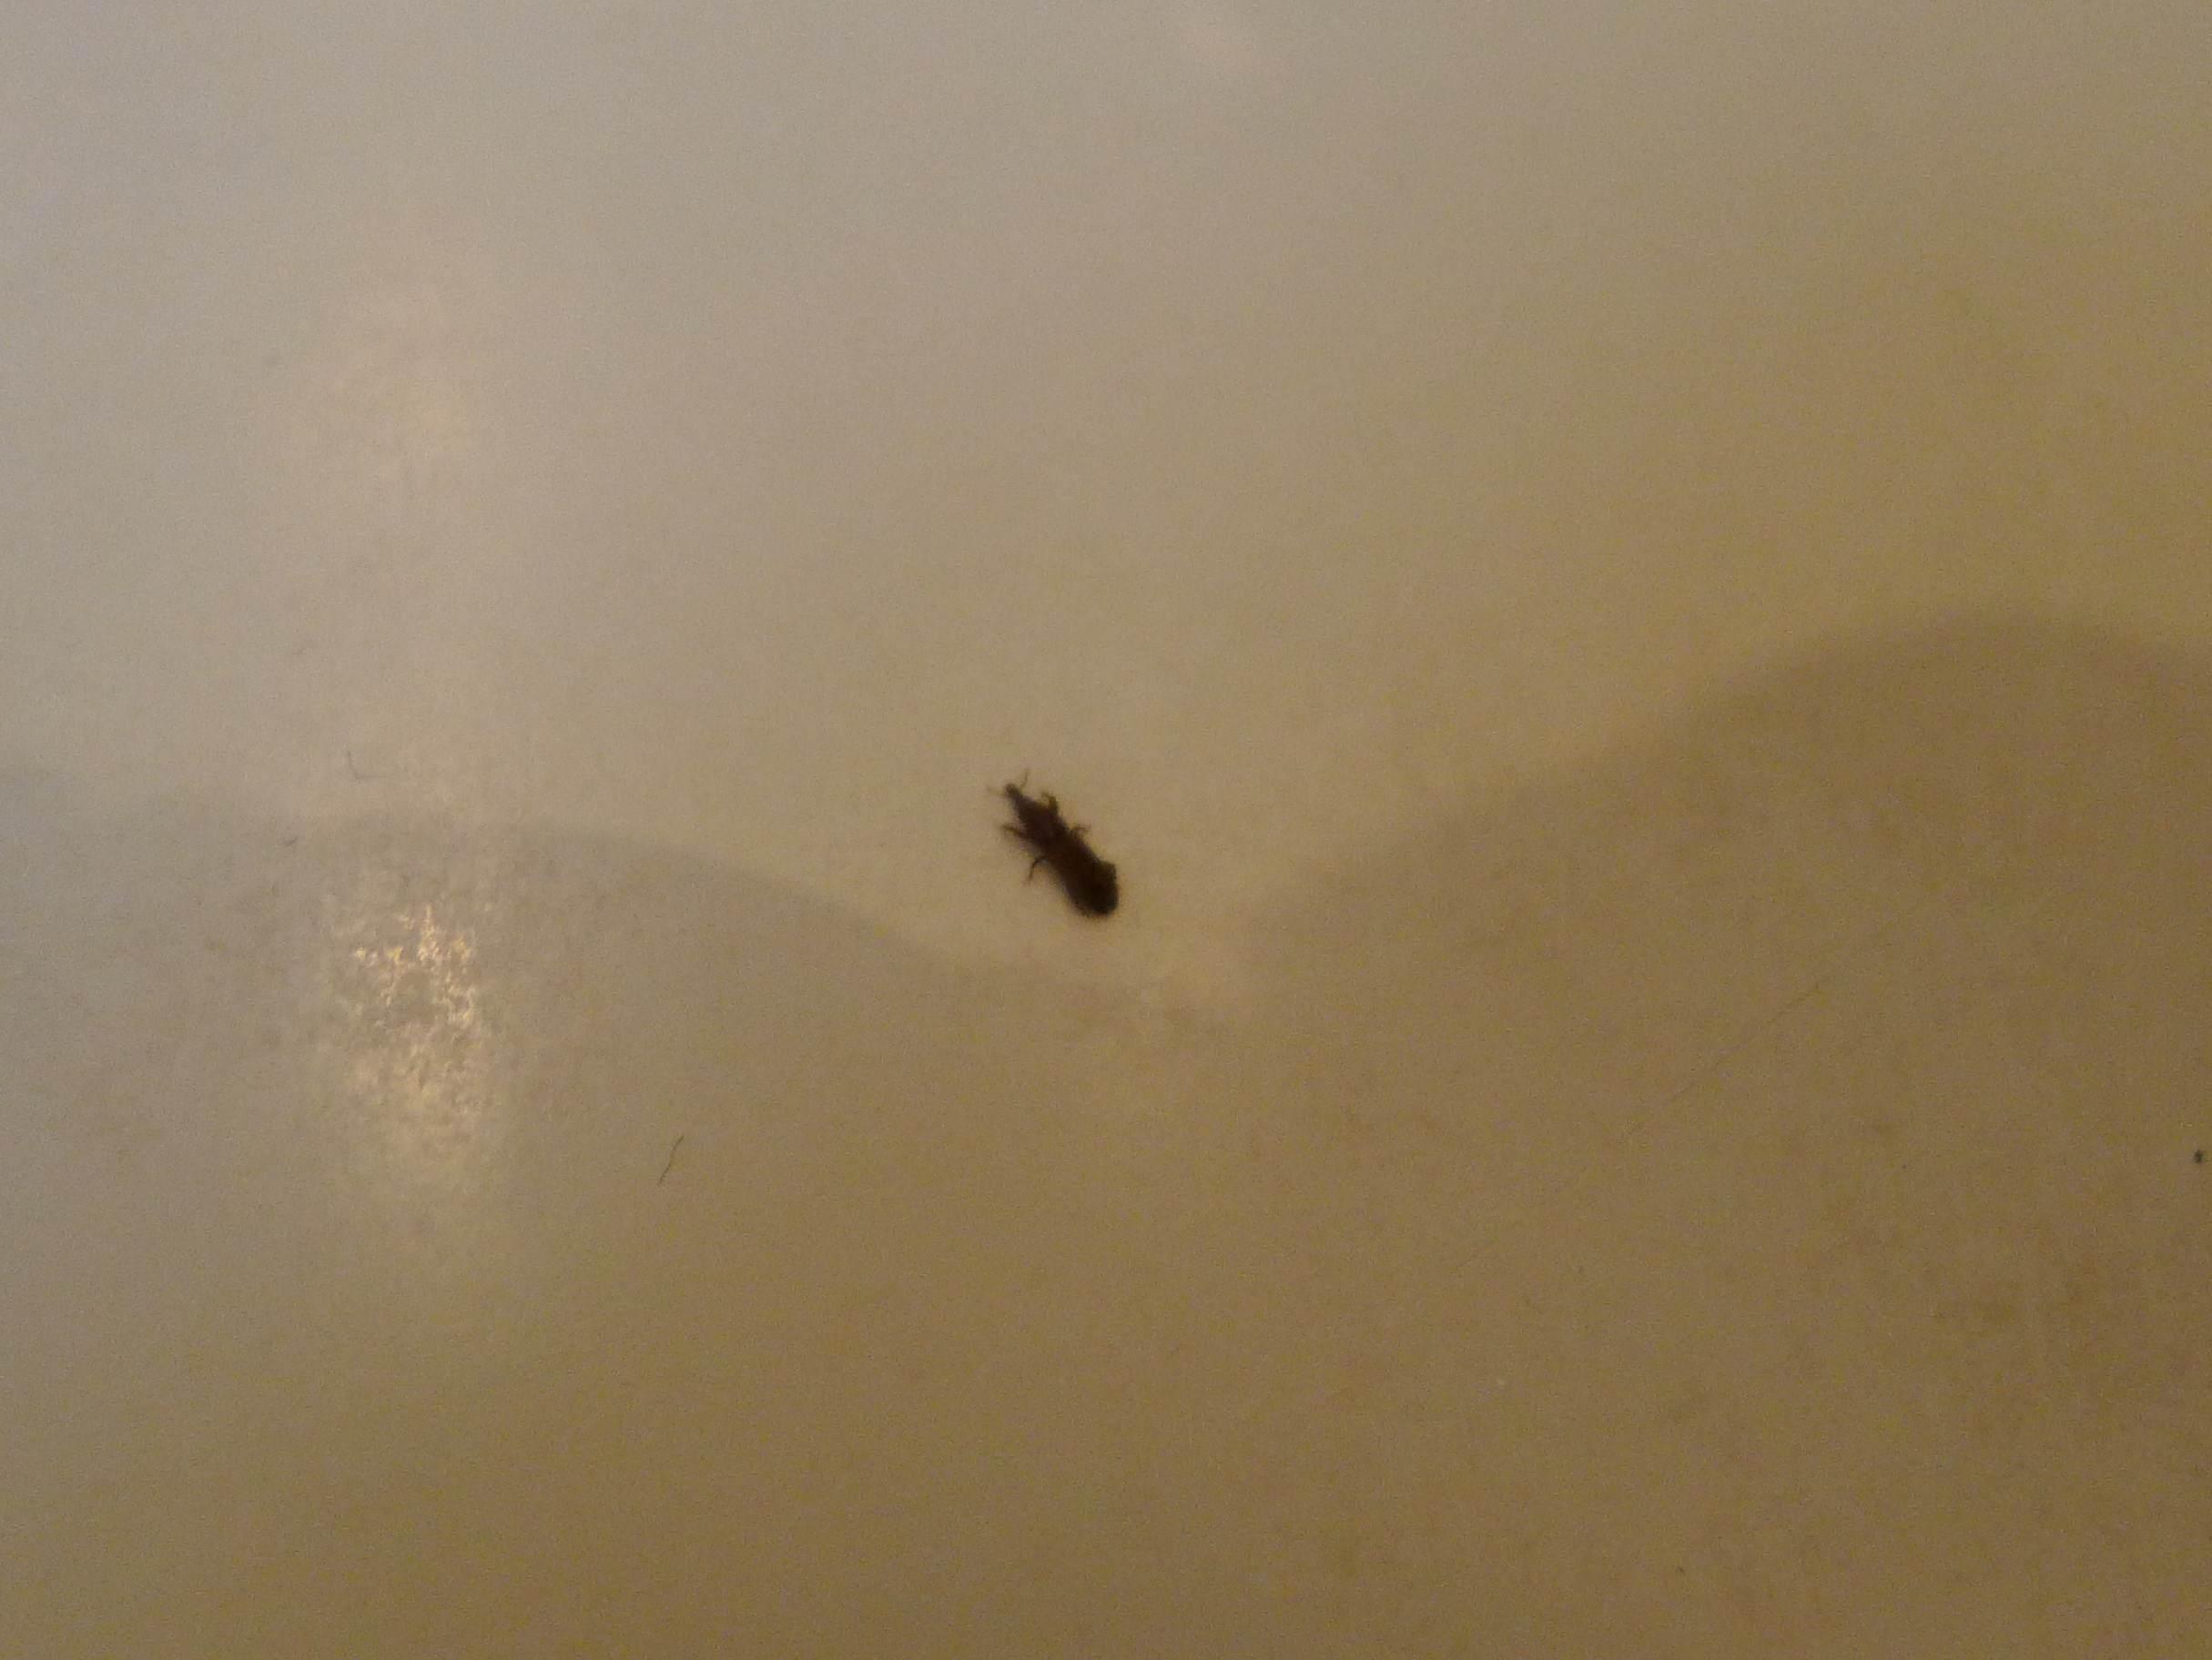 small bugs in bathroom sink that jump